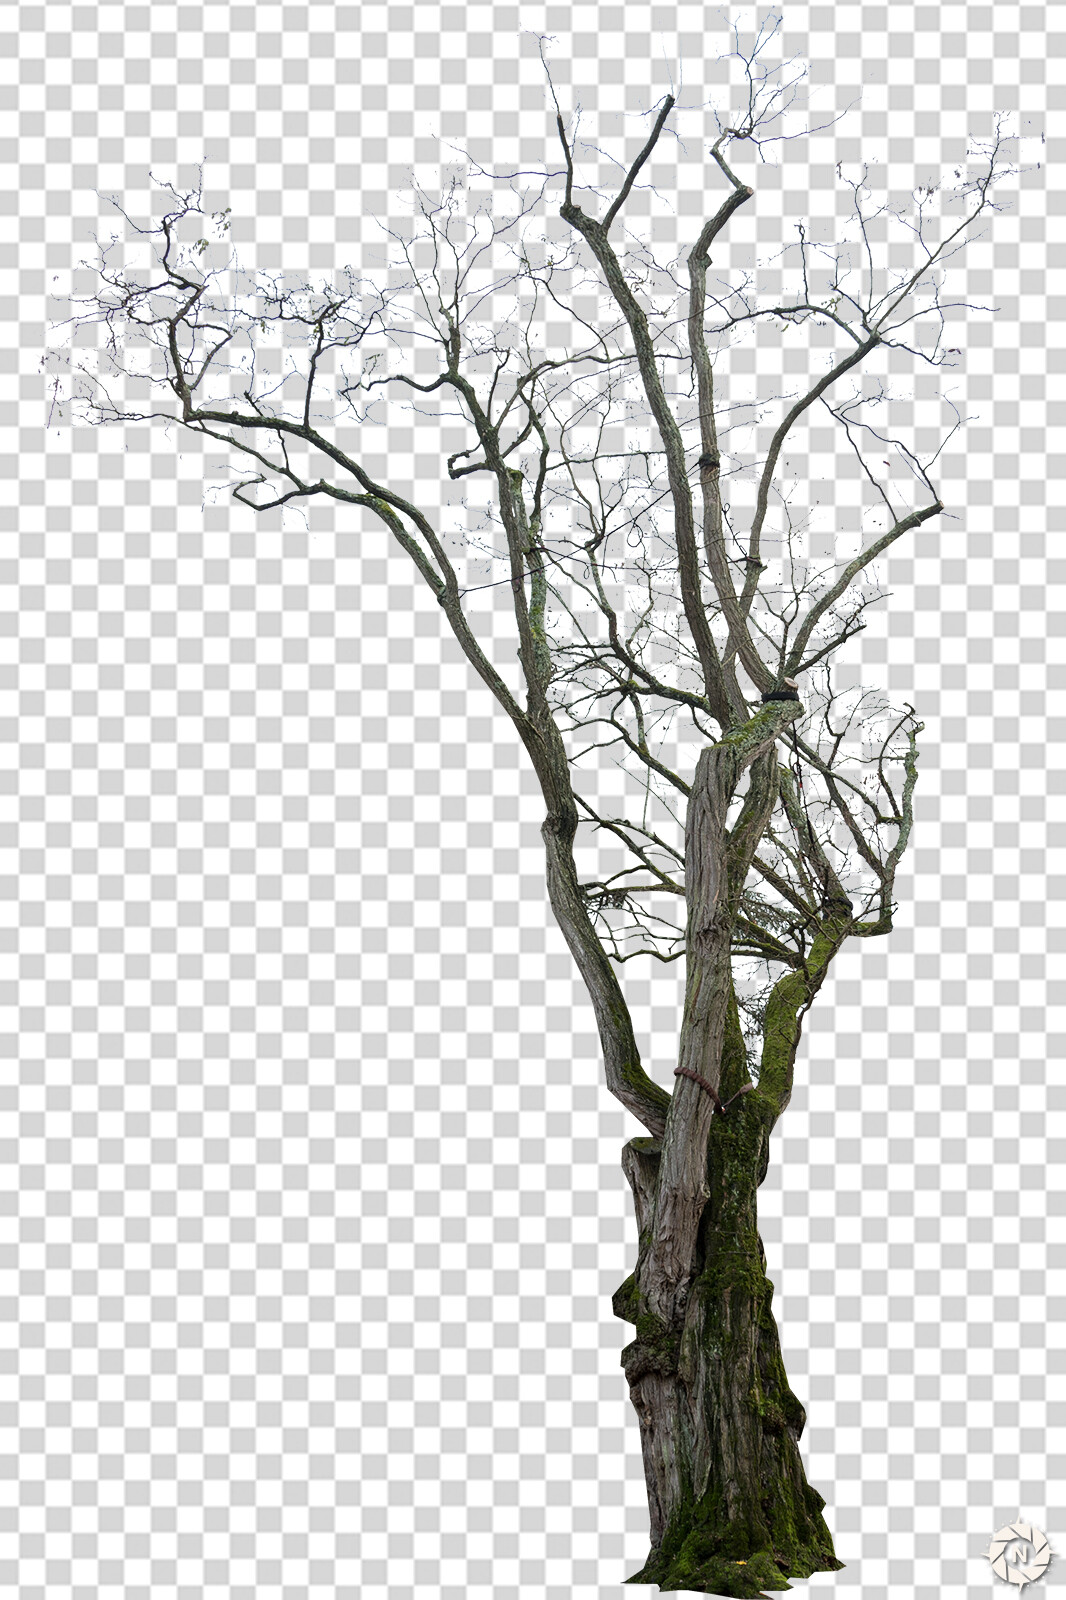 From the PNG Photo Pack: Dead Trees

https://www.artstation.com/a/165912